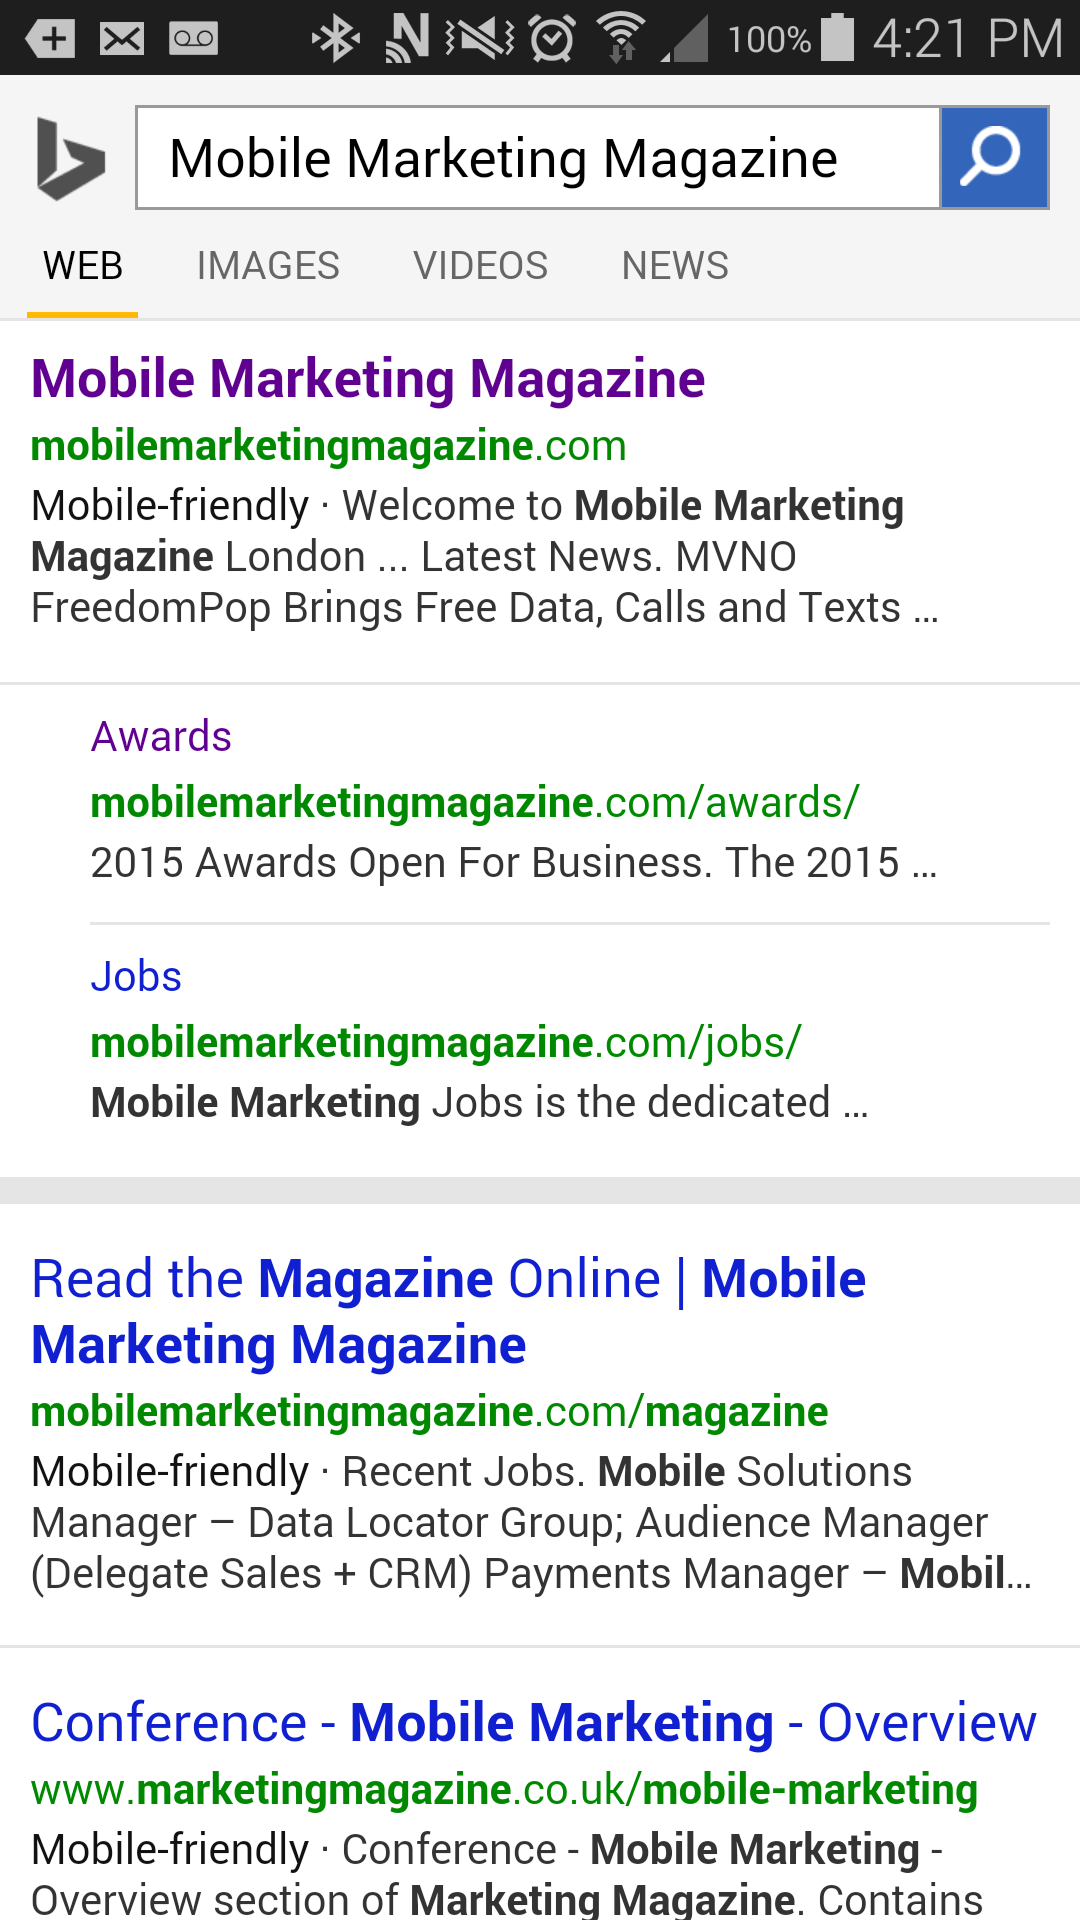 Bing to Reward Mobile-friendly Sites in Search Results